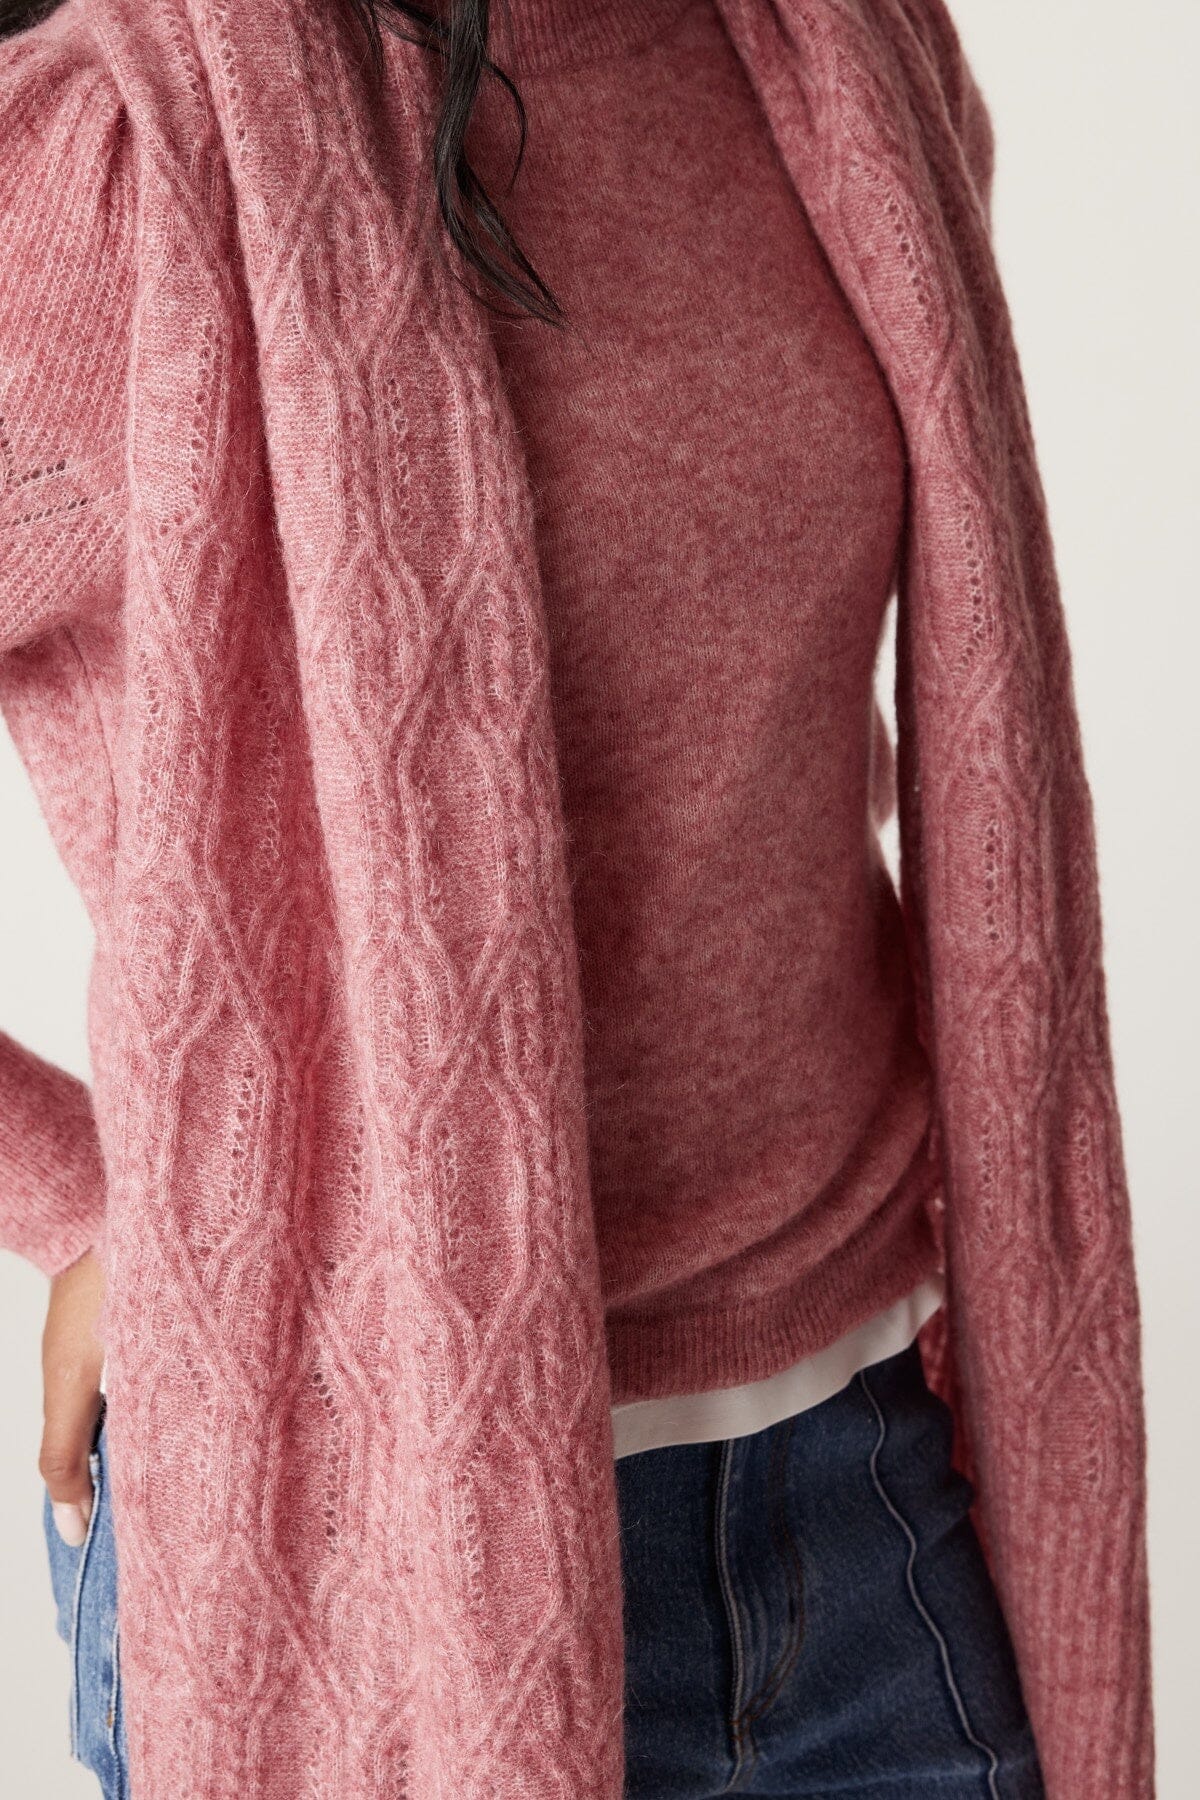 MOHAIR CABLE SCARF - PINK